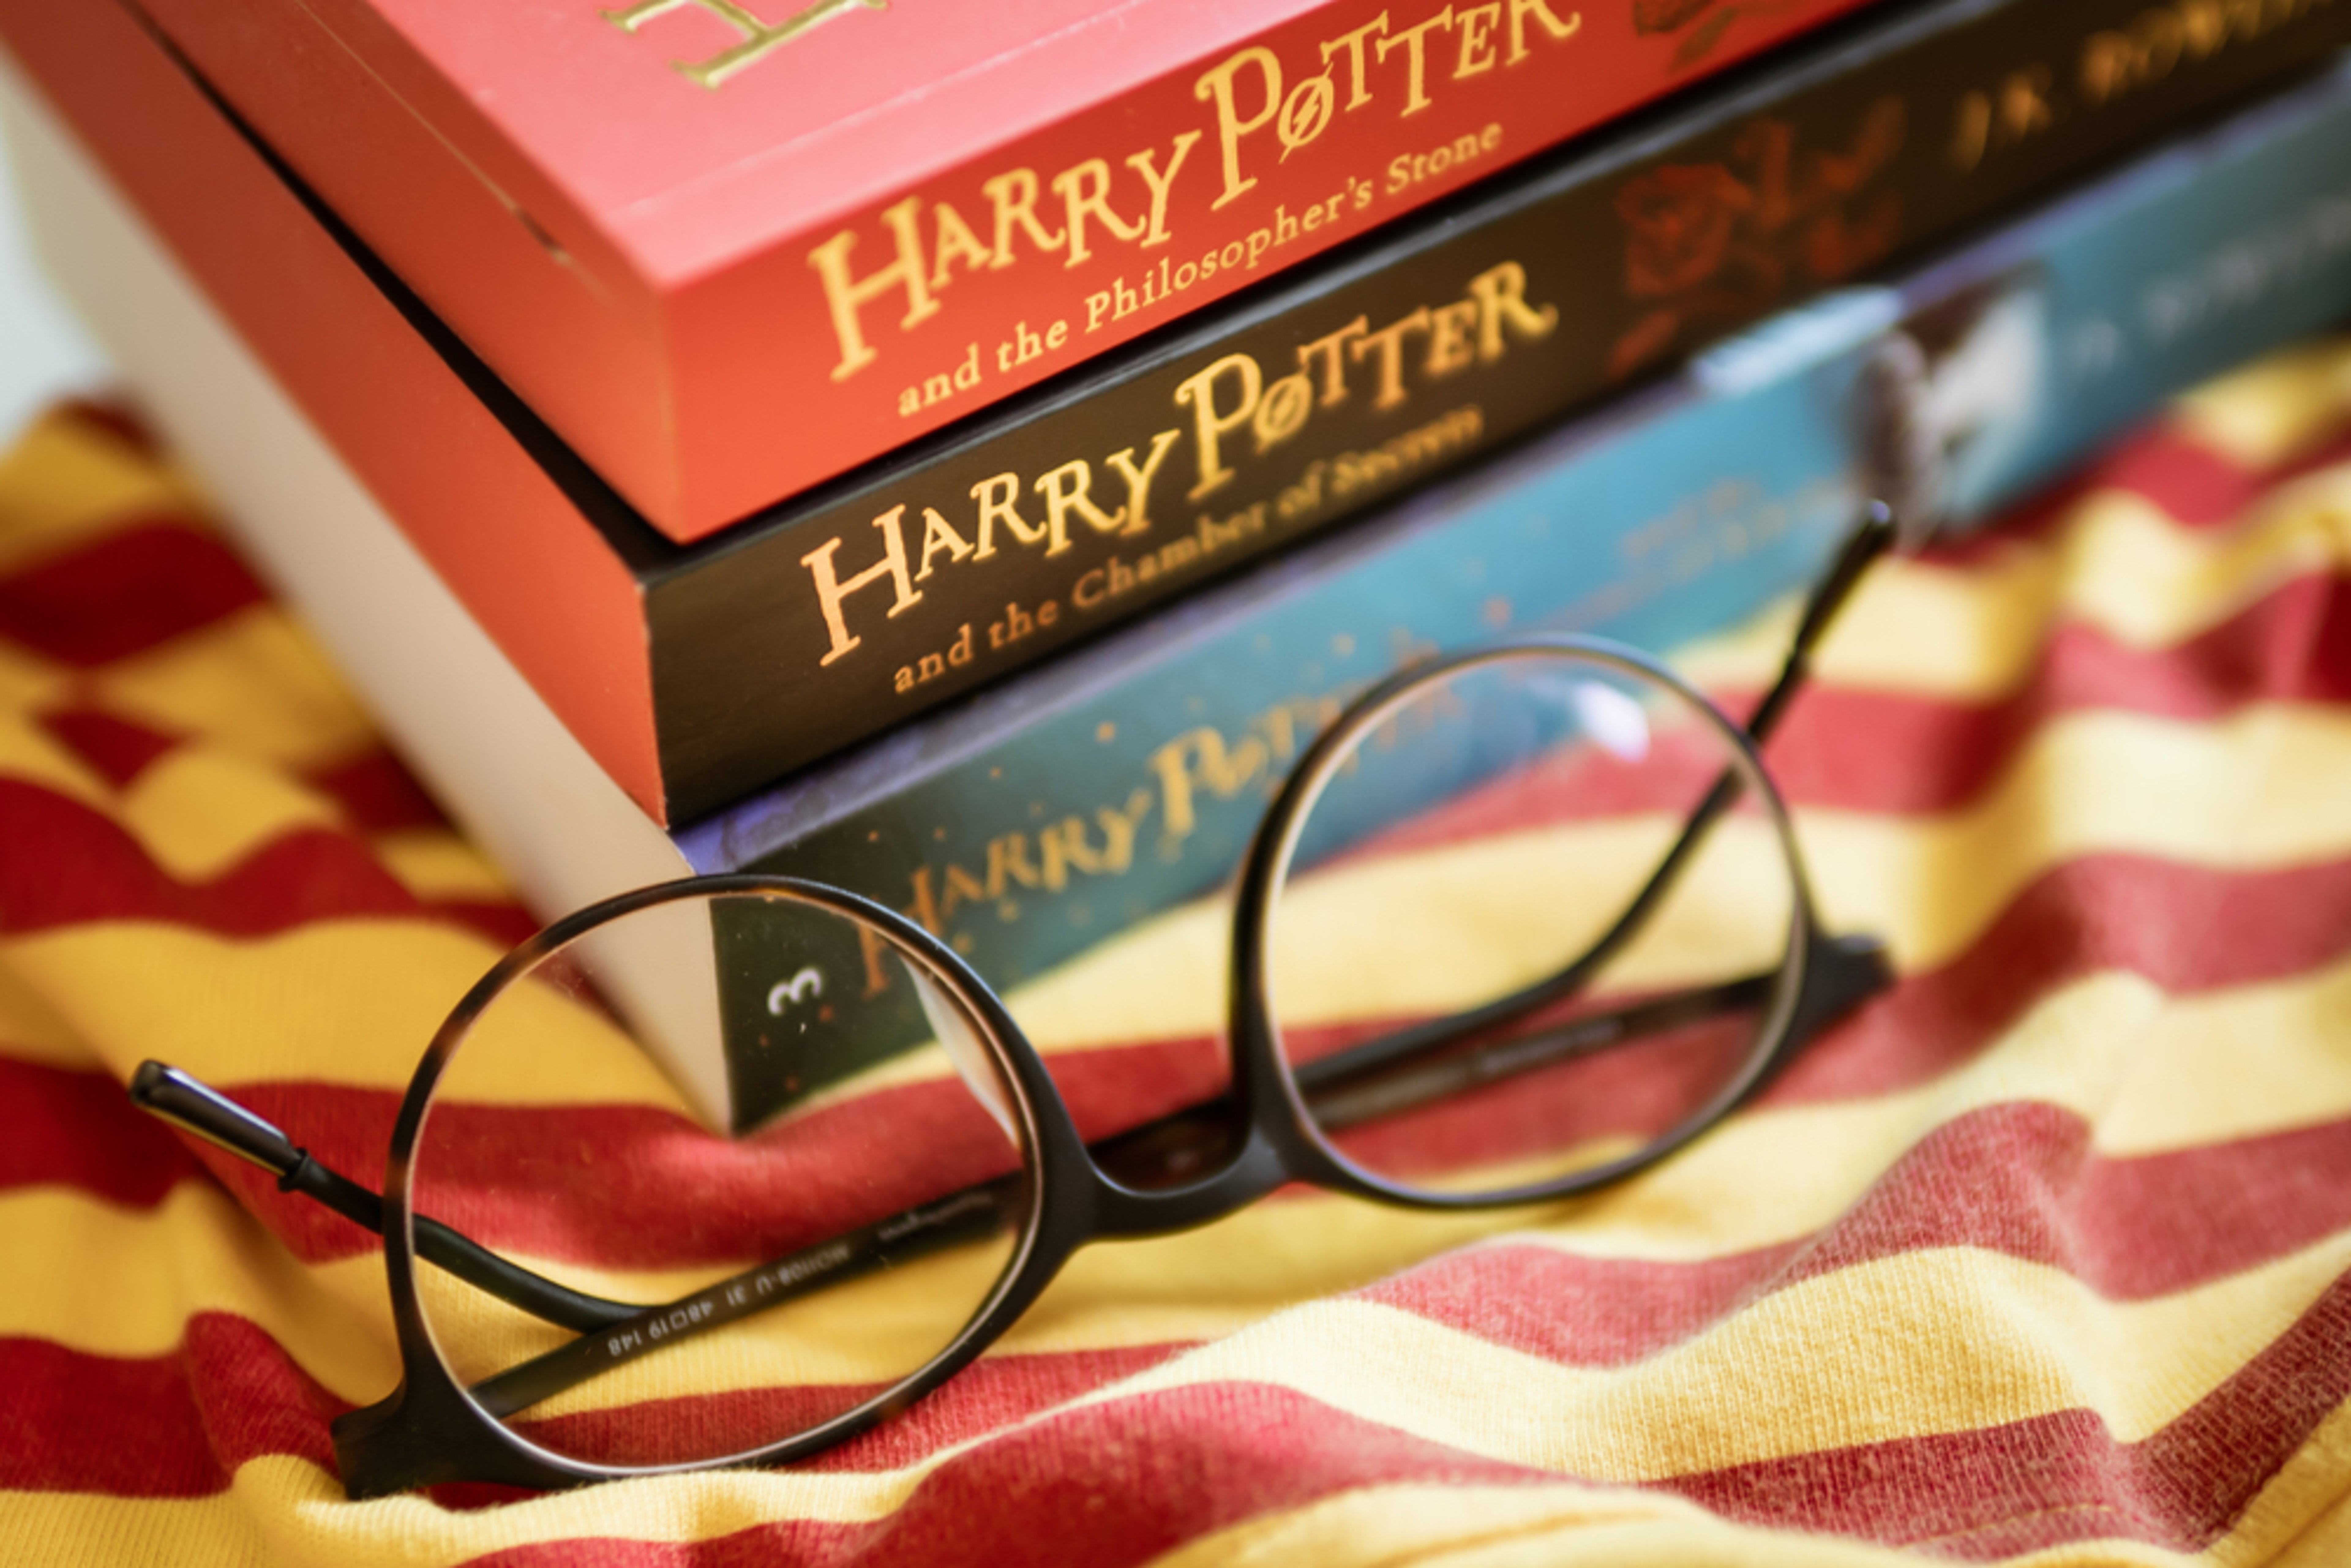 Harry Potter Magic Features On Paytm Device In Delhi Bookstore